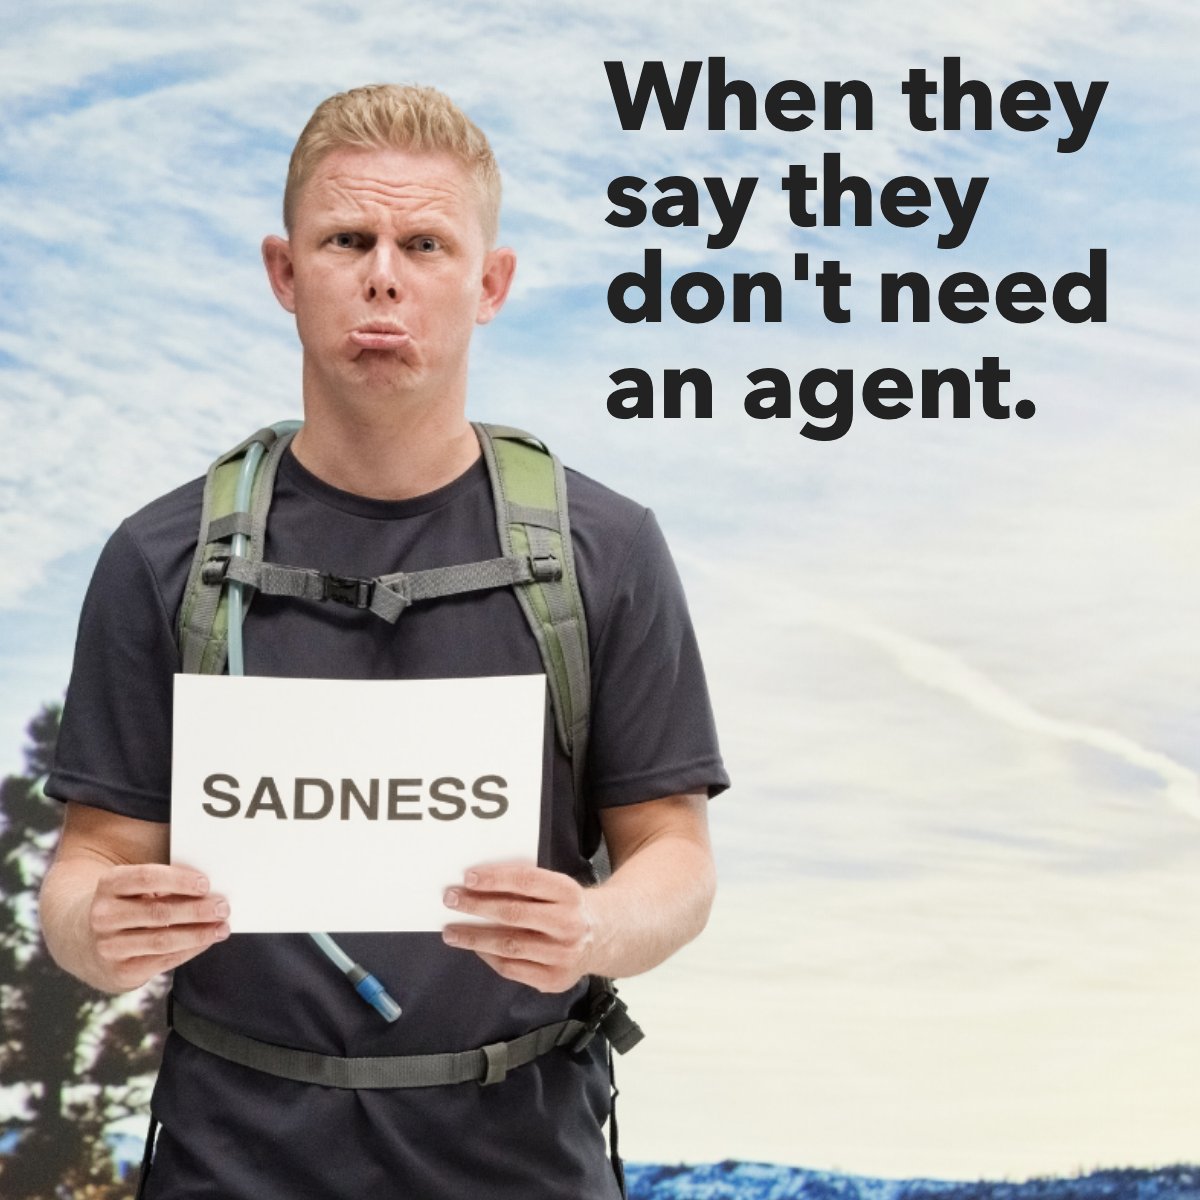 They hurt our feelings. 💔🥺

#sadness    #realestatehumor    #realestatejokes    #realestateagent    #theydoneedus
#HomeForSale #SimiValleyHOmes #ThousandOaksHOmesforSale #MoorparkHomesForSale #VenturaCountyHomeForSale #CindyTothRealtor #EducateAndNEgotiate